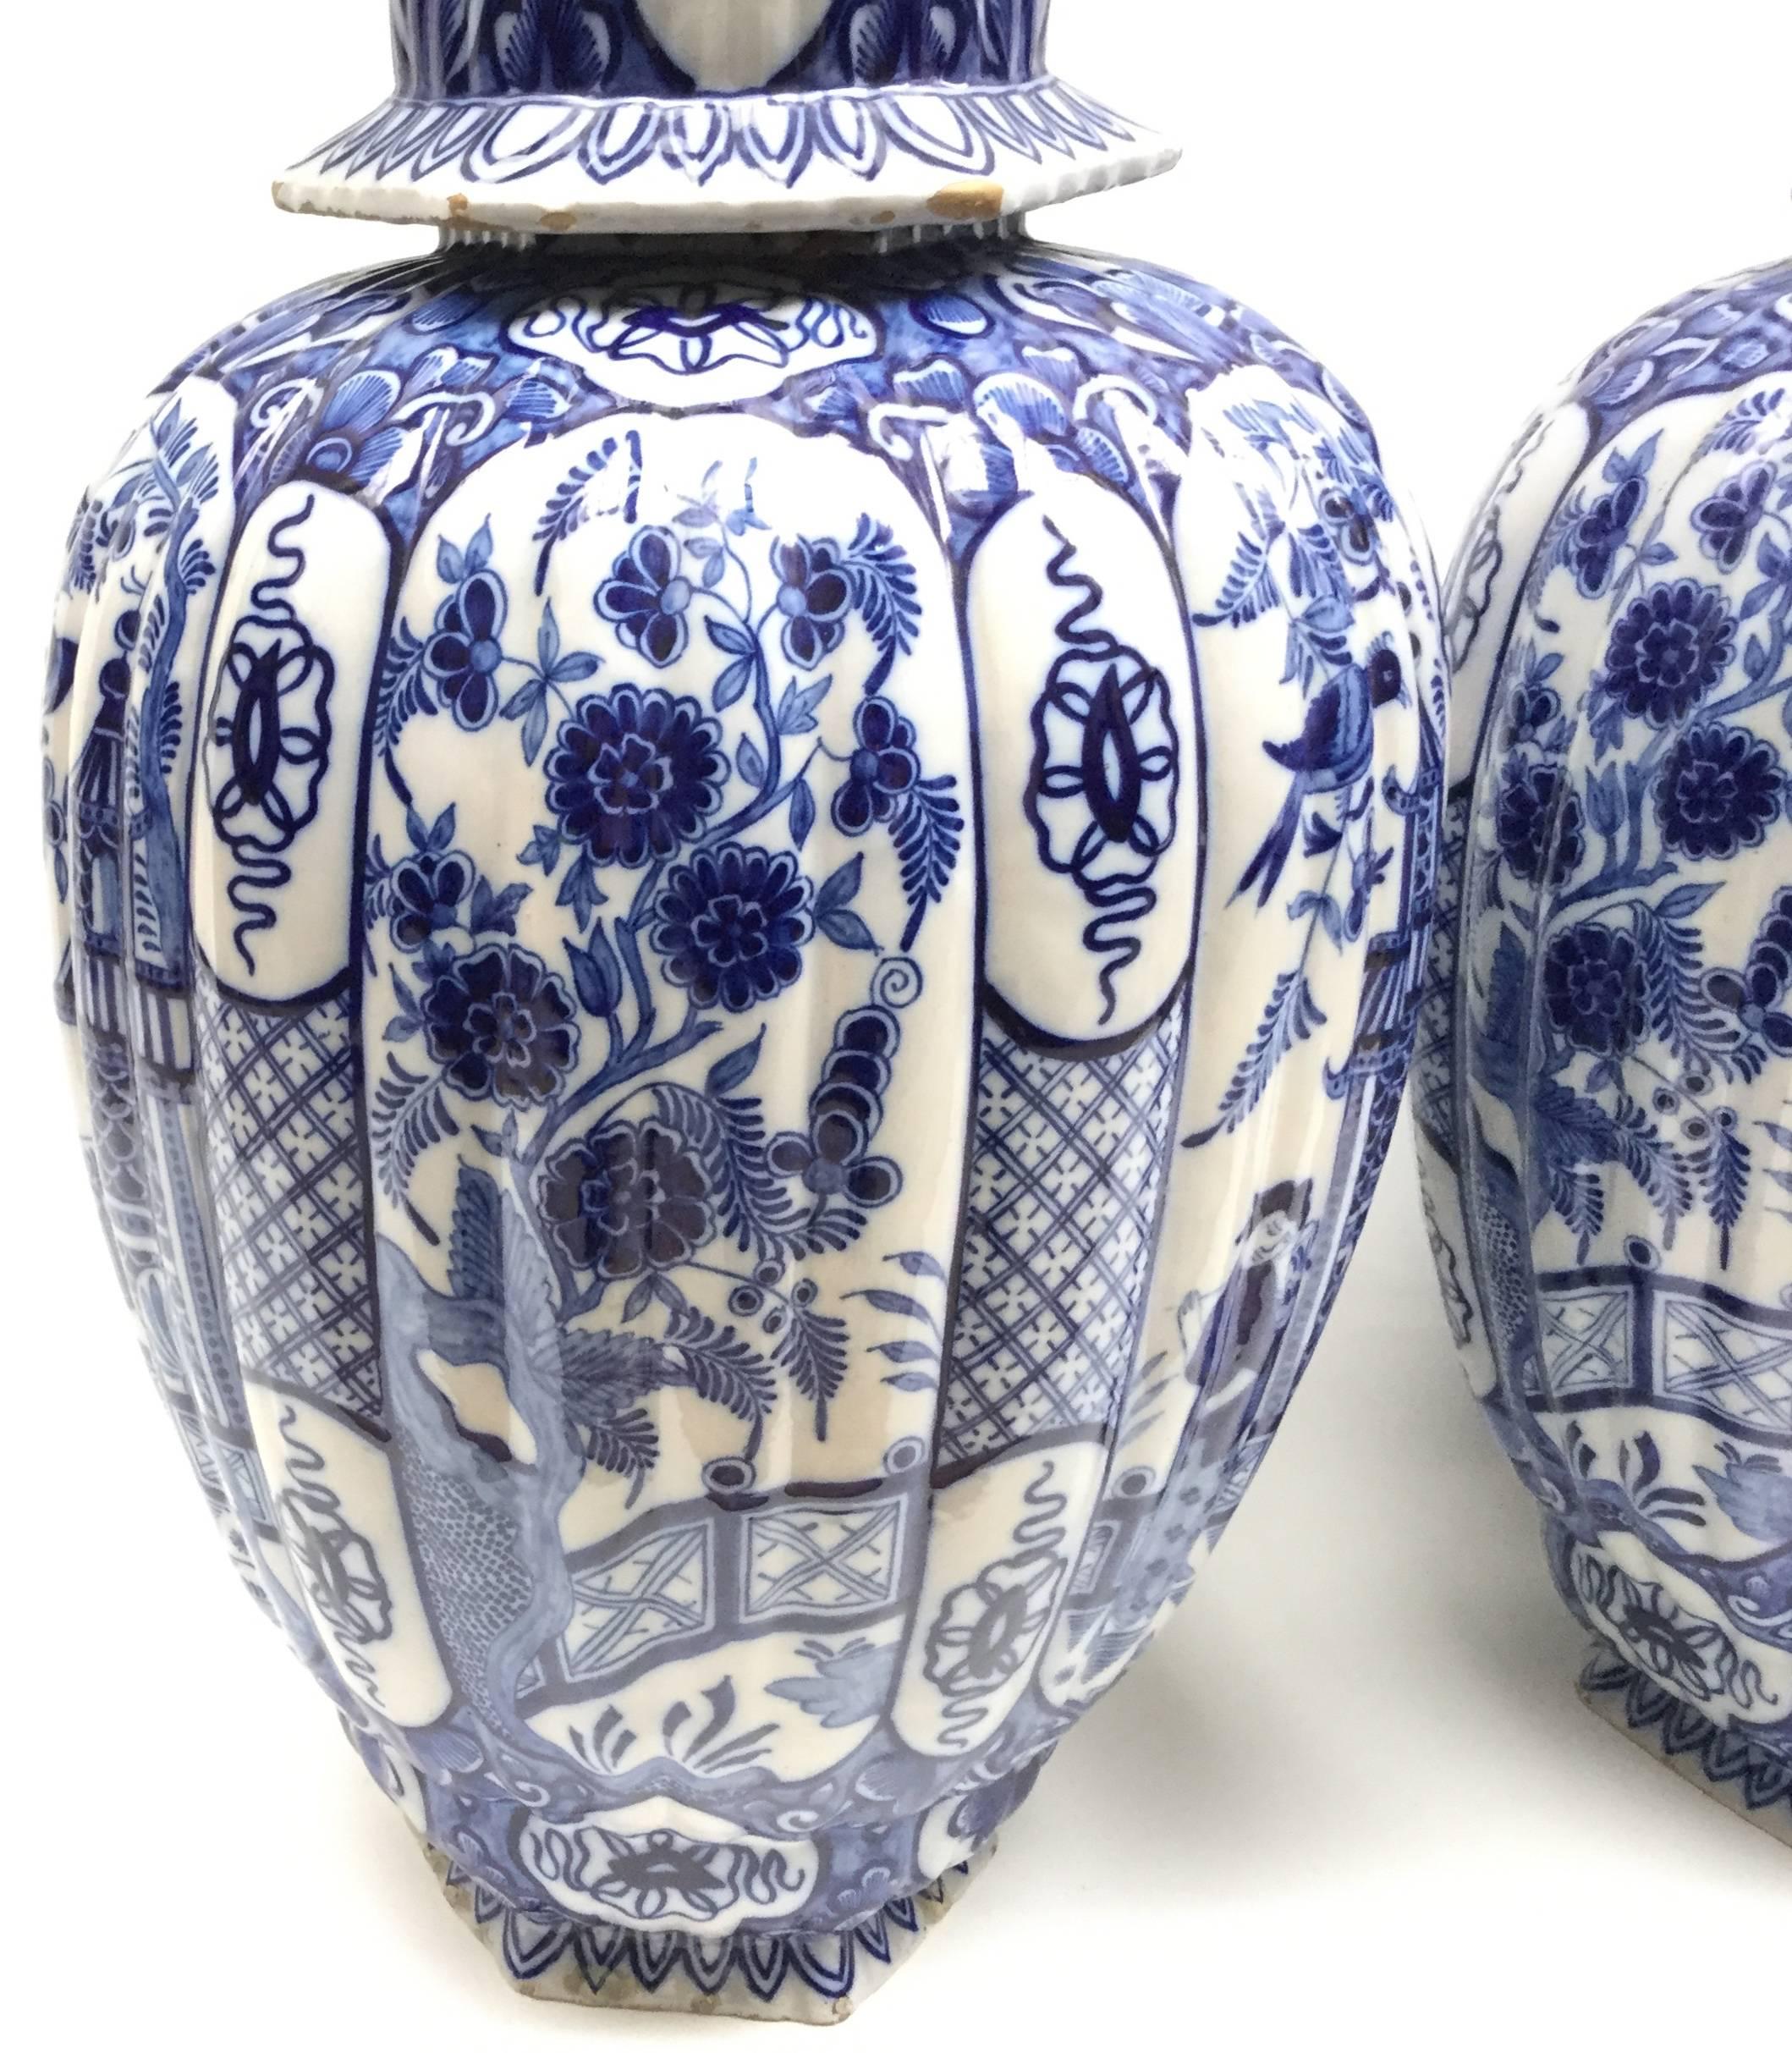 A monumental pair of delft blue and white baluster vases with garden scenes in the chinoiserie style. Whimsical cat finials top the hexagon lids.
In beautiful presentable condition with some chips and repairs that are to be expected in soft bodied